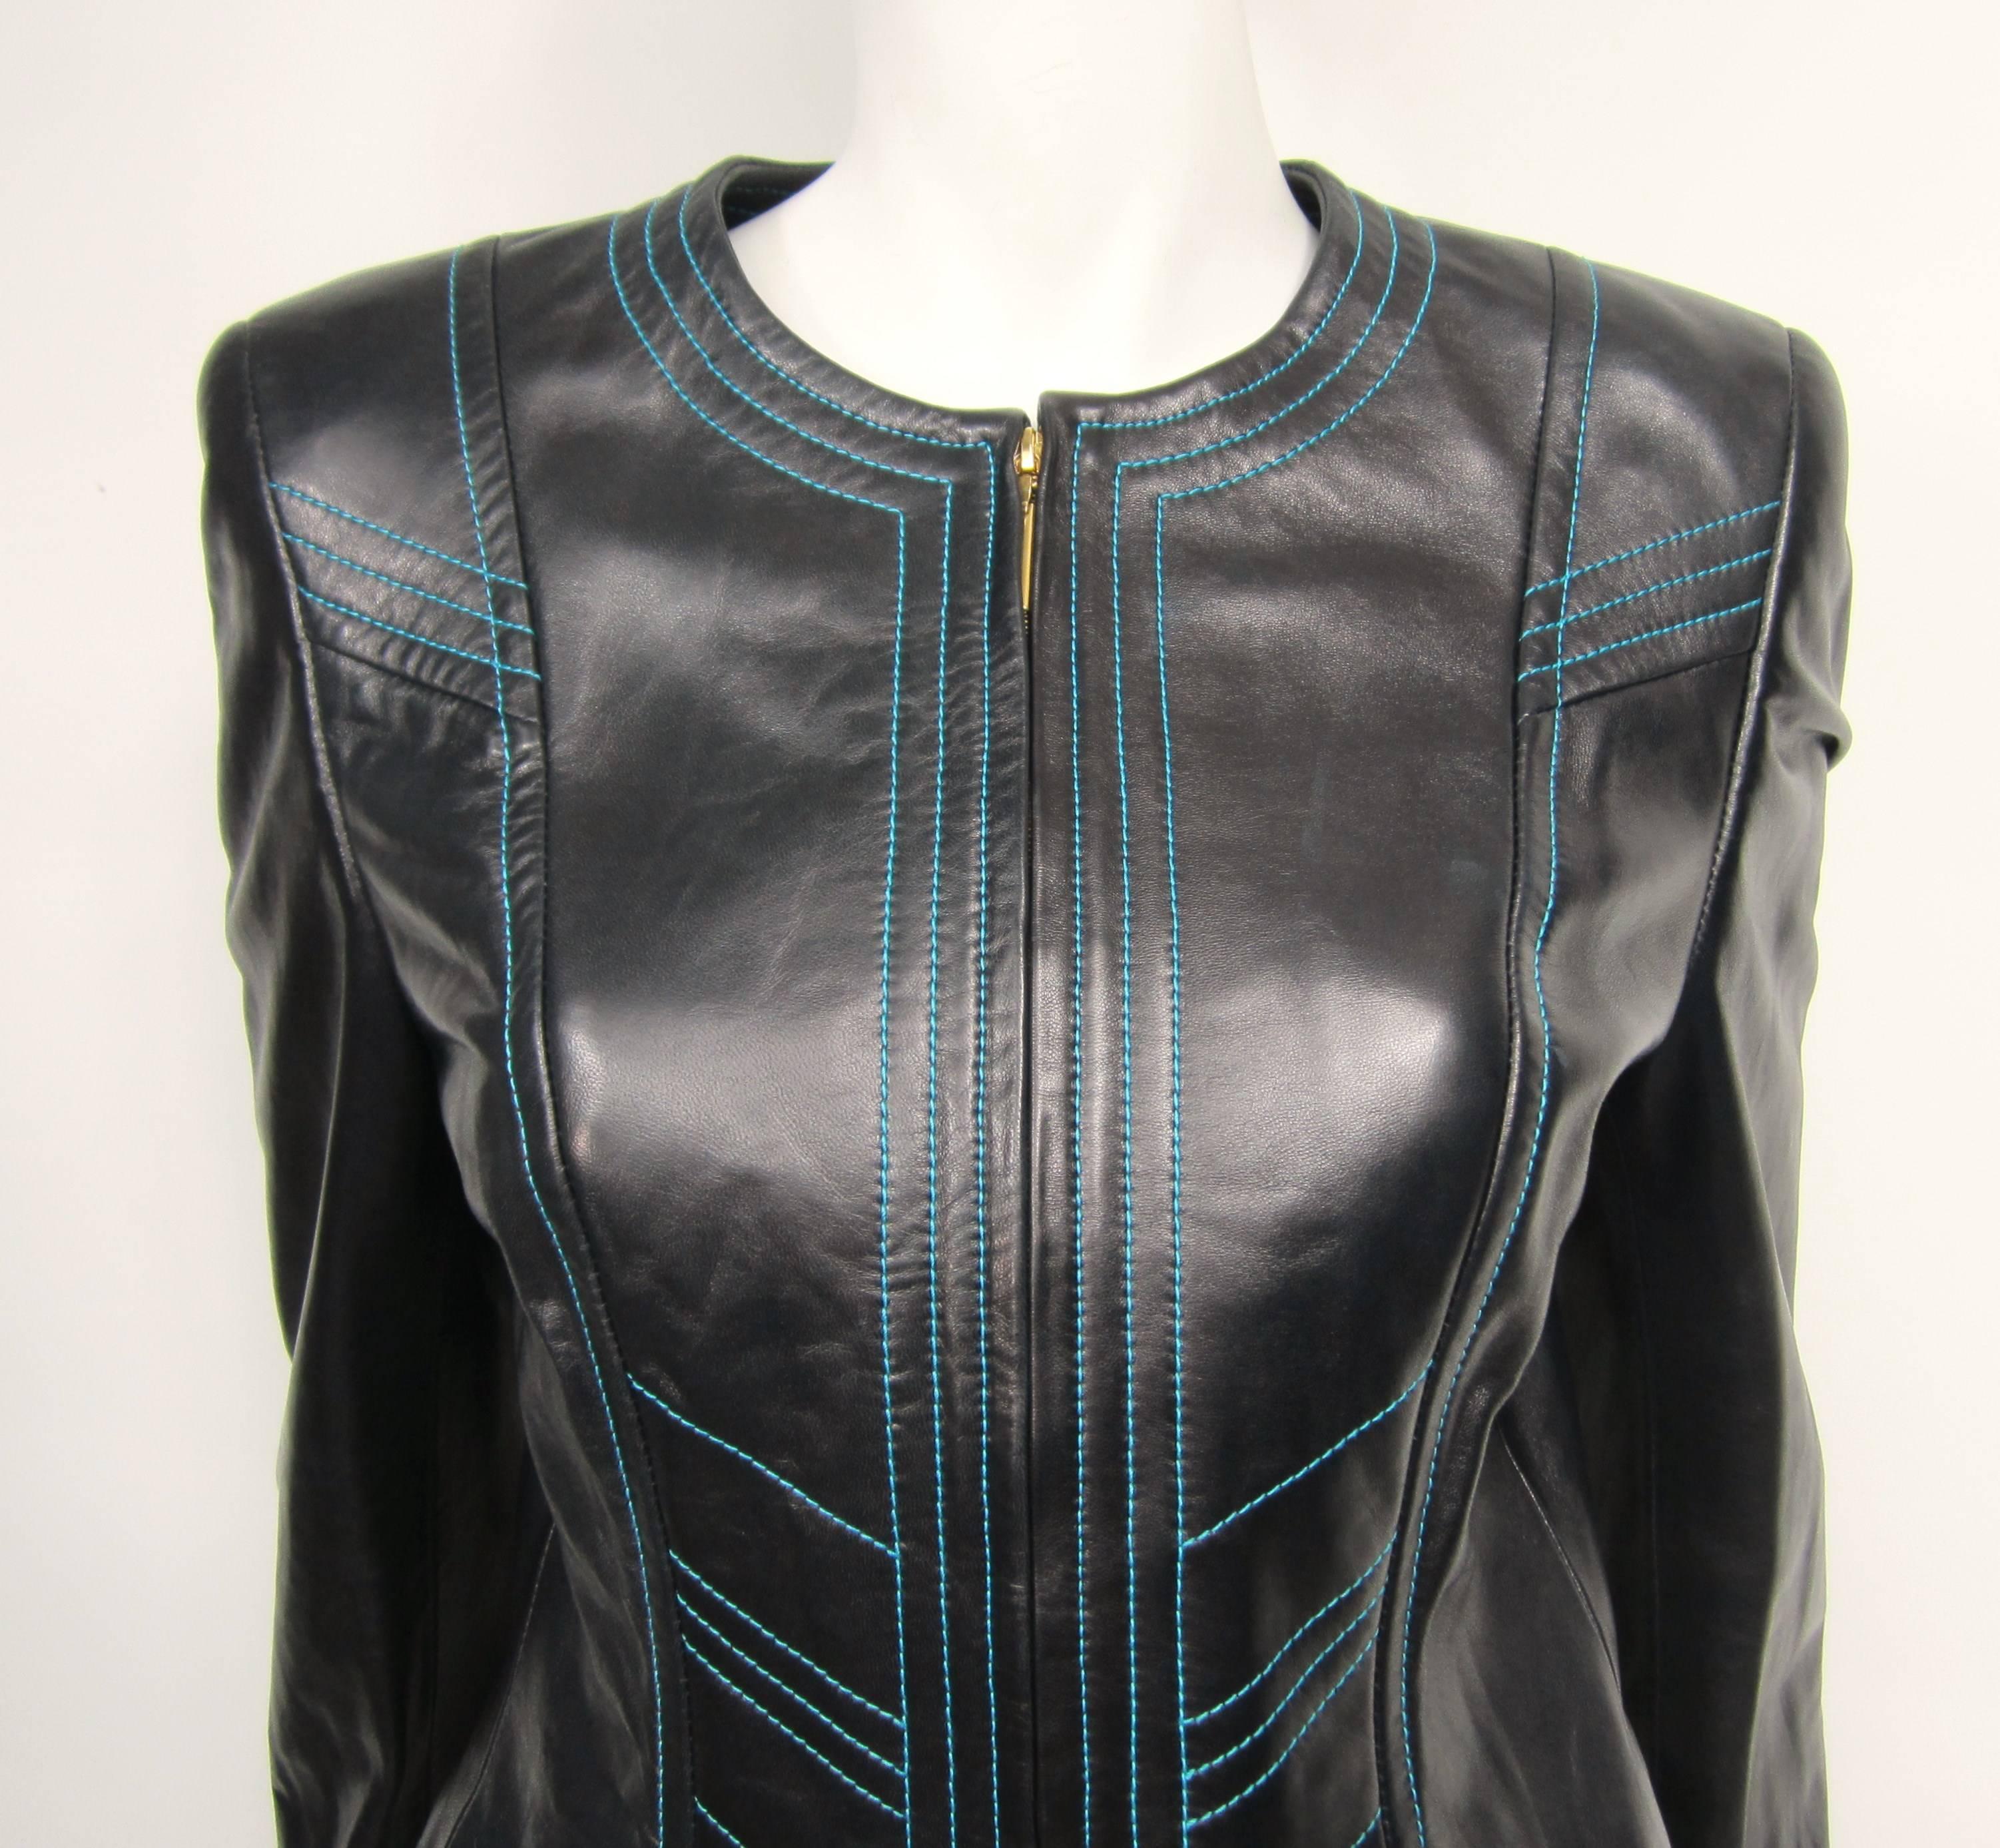 Black Leather Escada Jacket with Bright Blue Stitching. Gold Tone zipper detailing. Matching skirt is on our store front as well. Measuring - Up to 36 Bust  - Up to 30 waist  - Length is 21.25 - Sleeve 23.5 inches. Please check our storefront for